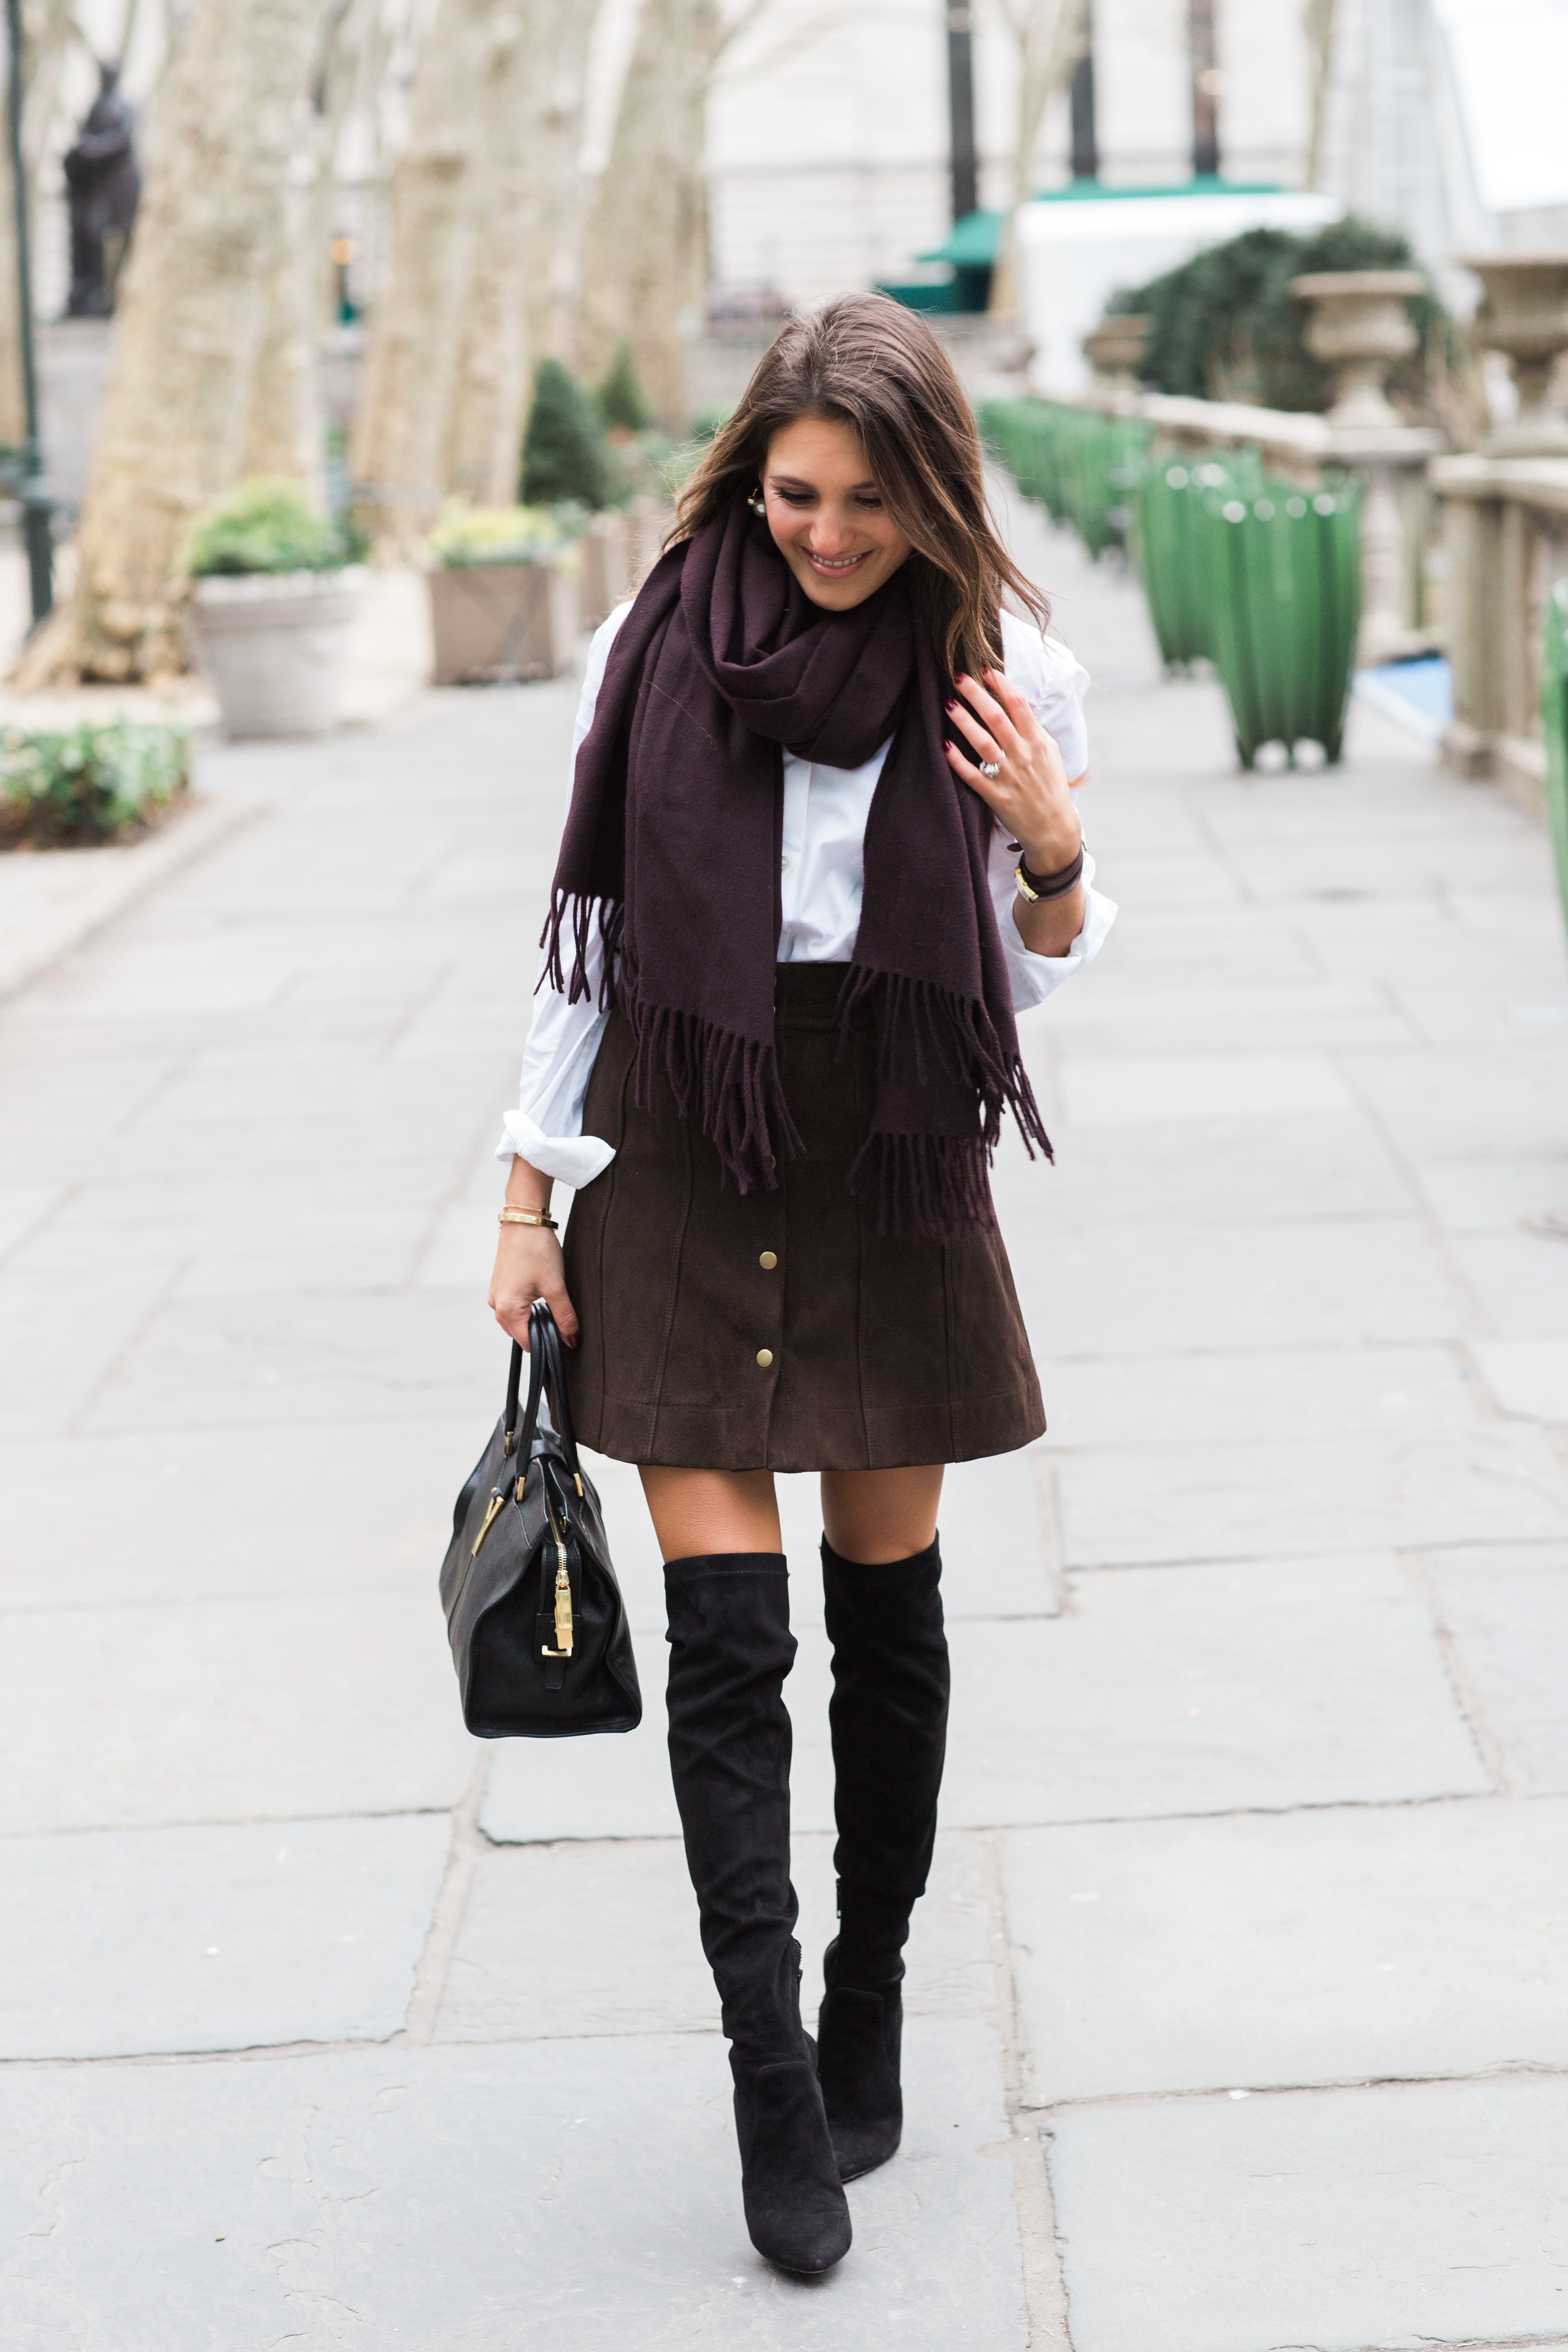 suede all the way - That Pencil Skirt